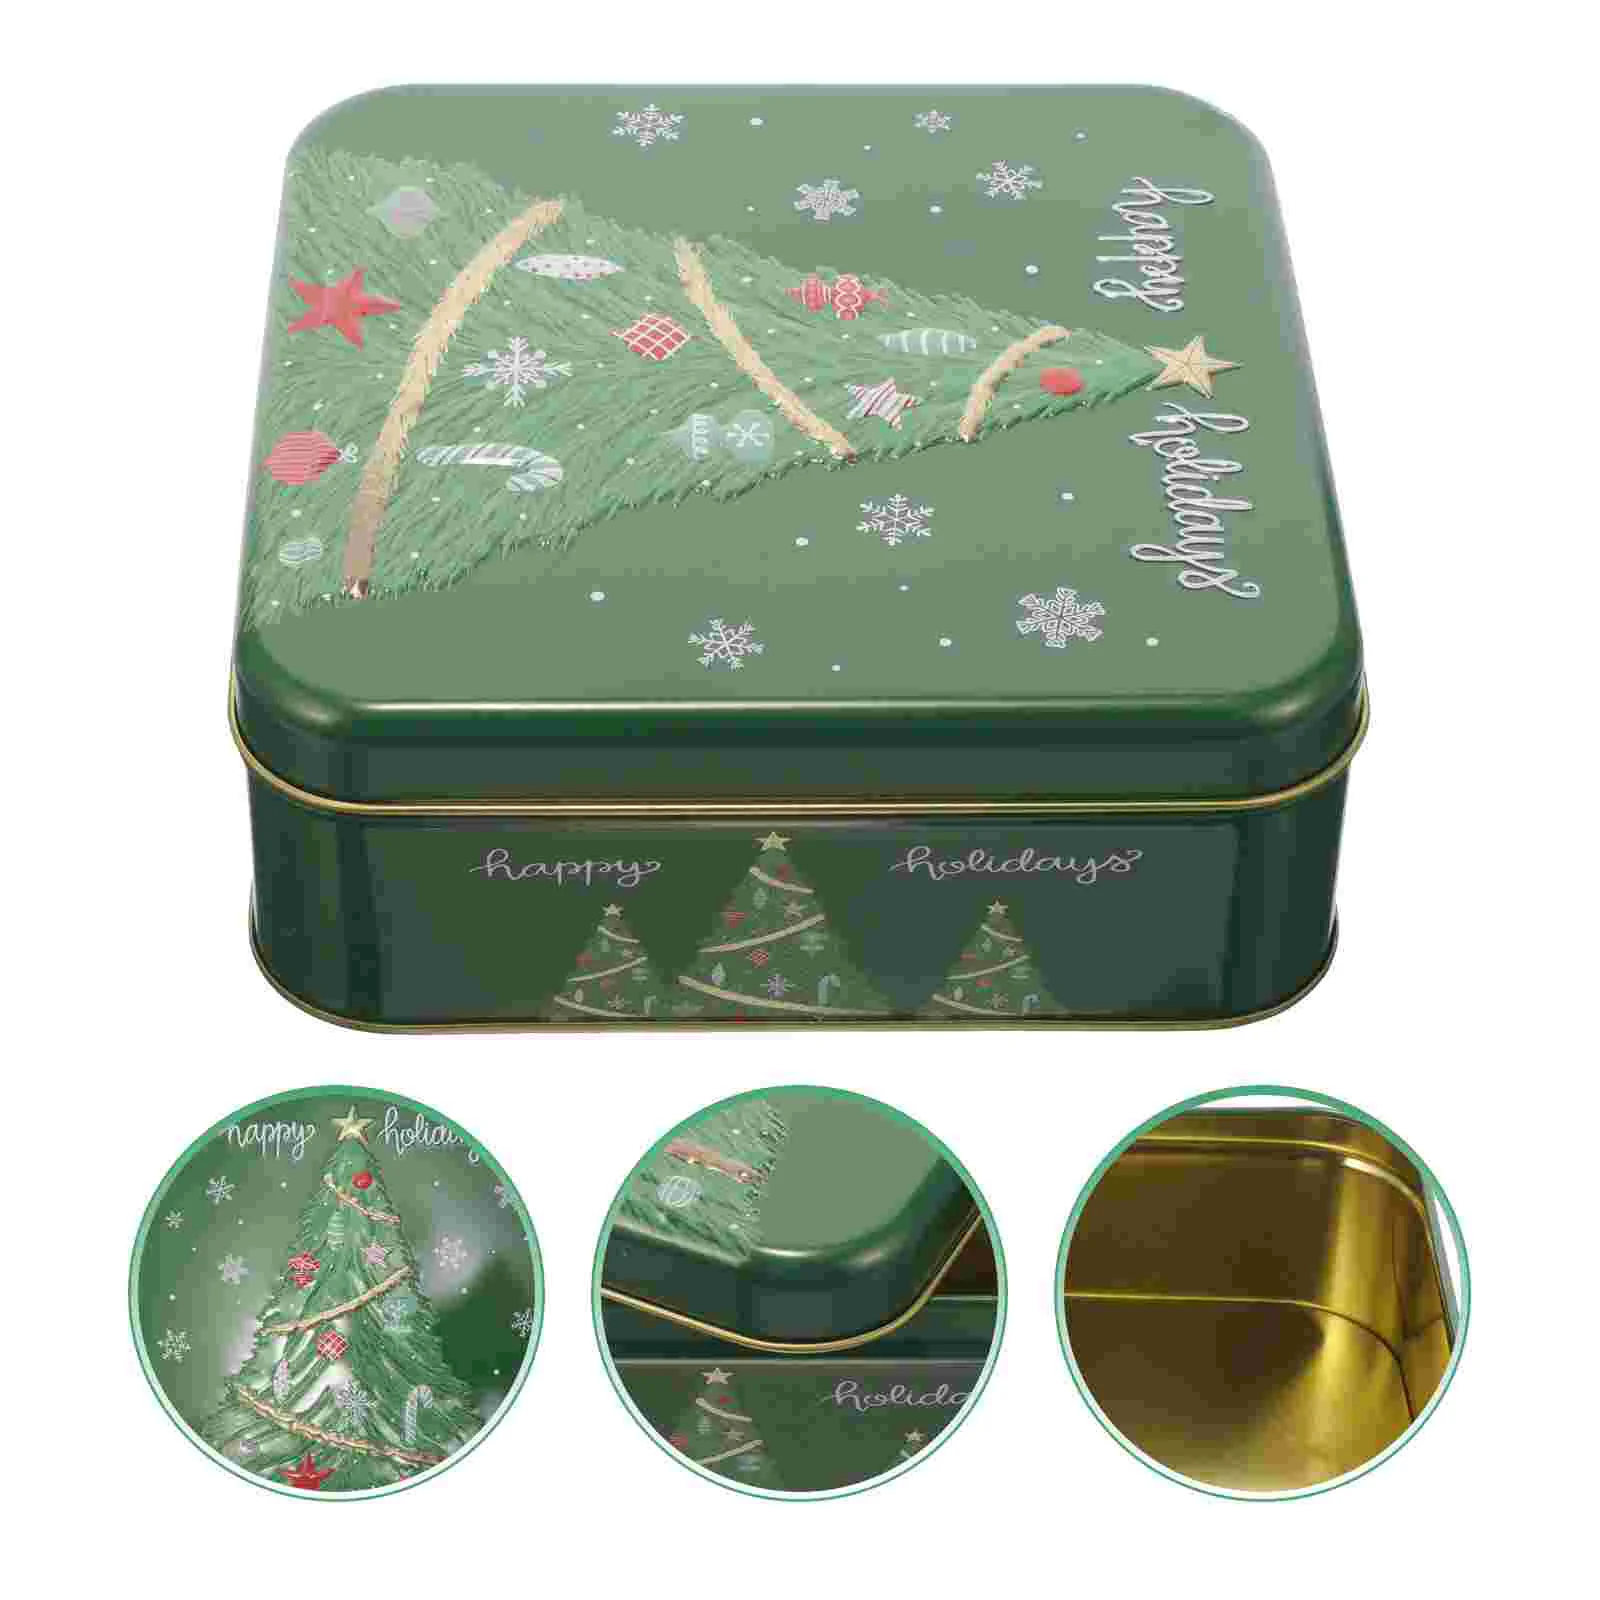 

Christmas Gift Box Cookie Tins Lids Gifts Jar Chocolate Empty Containers Party Metal Giving